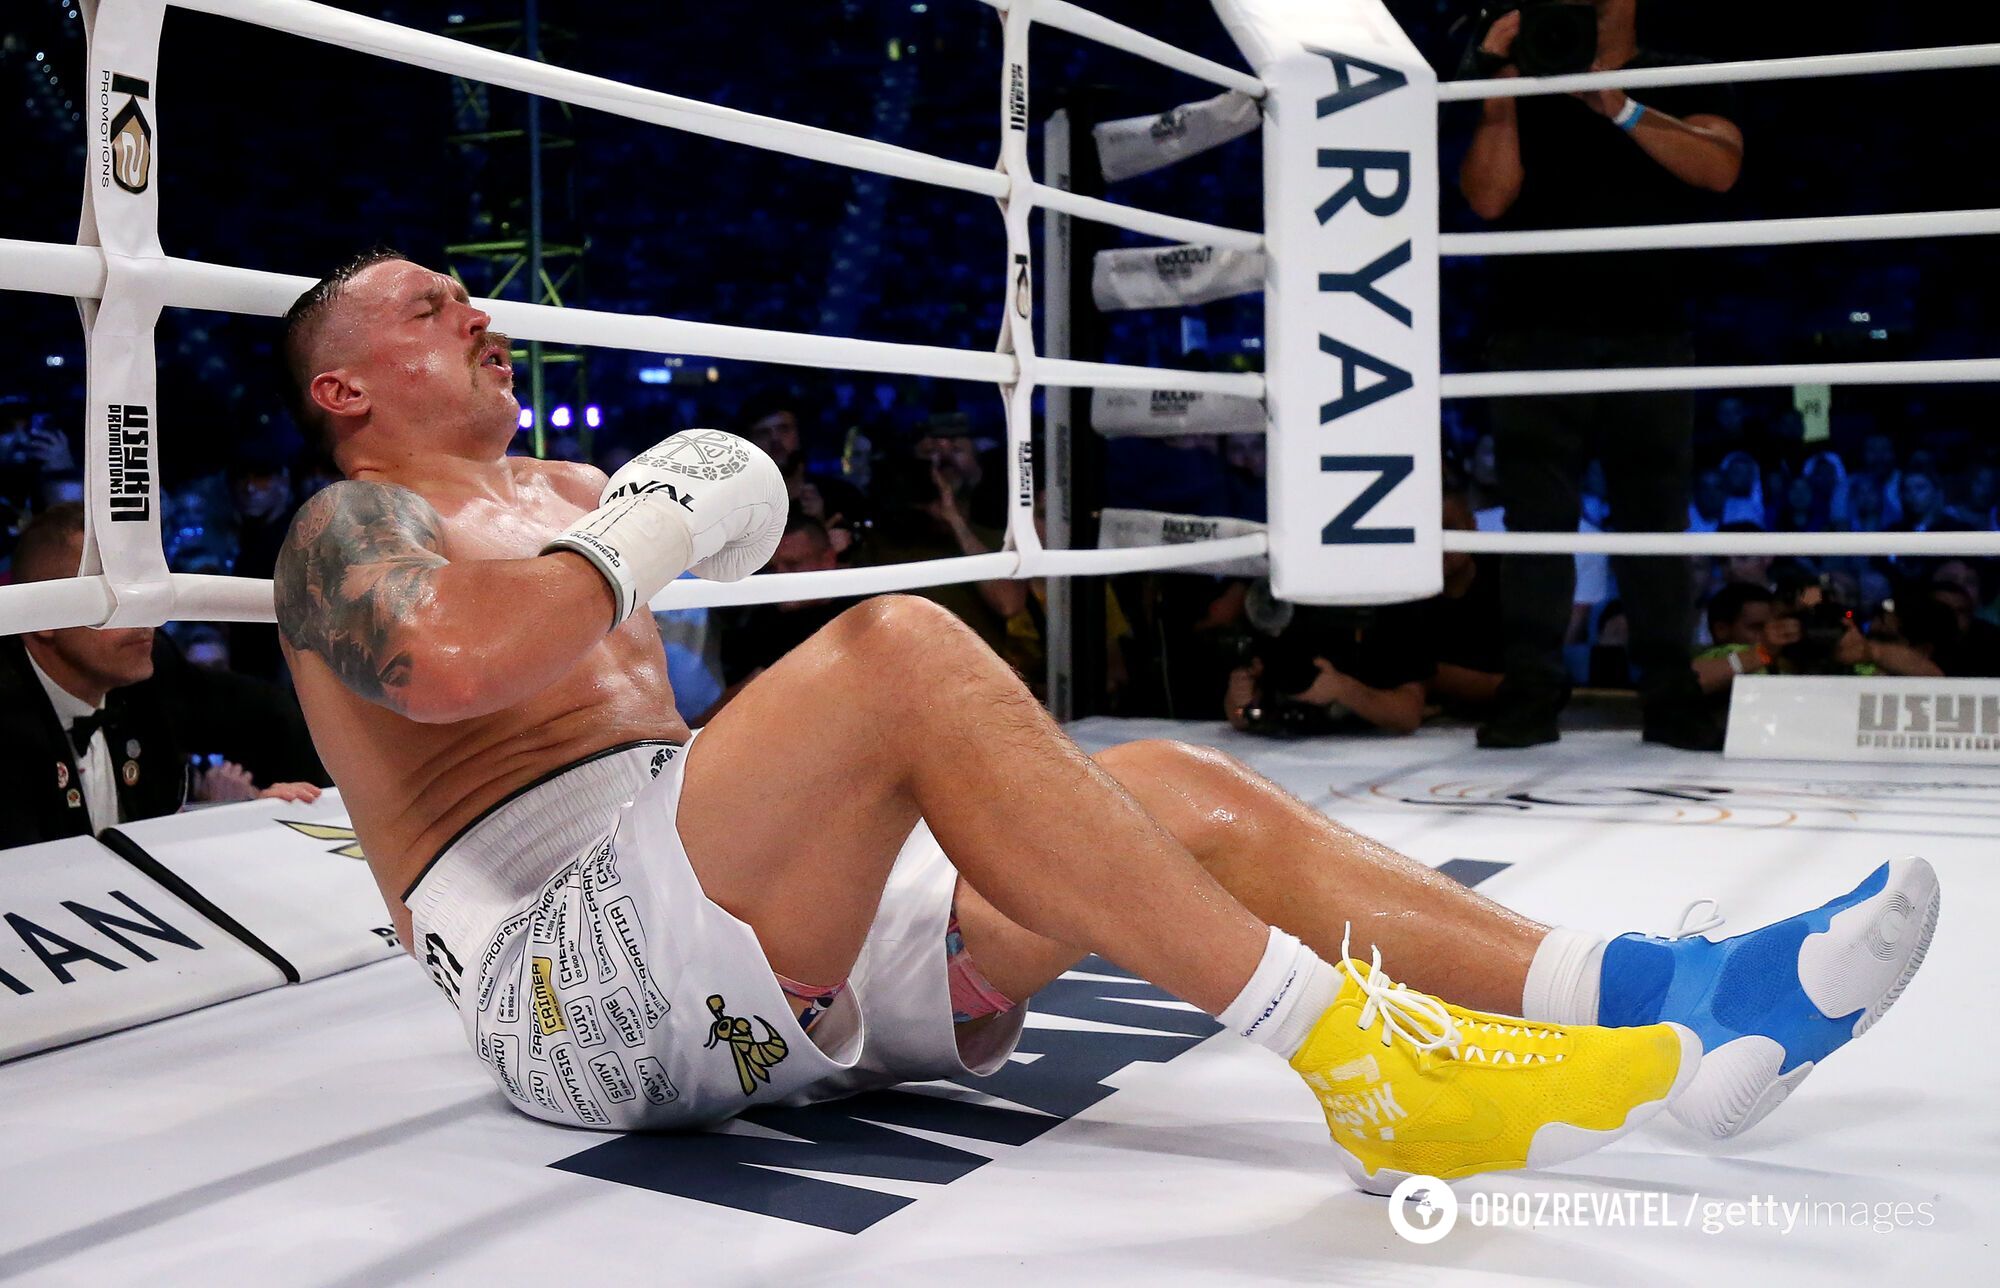 Usyk won a mean fight with a knockdown and defended his championship titles. Video